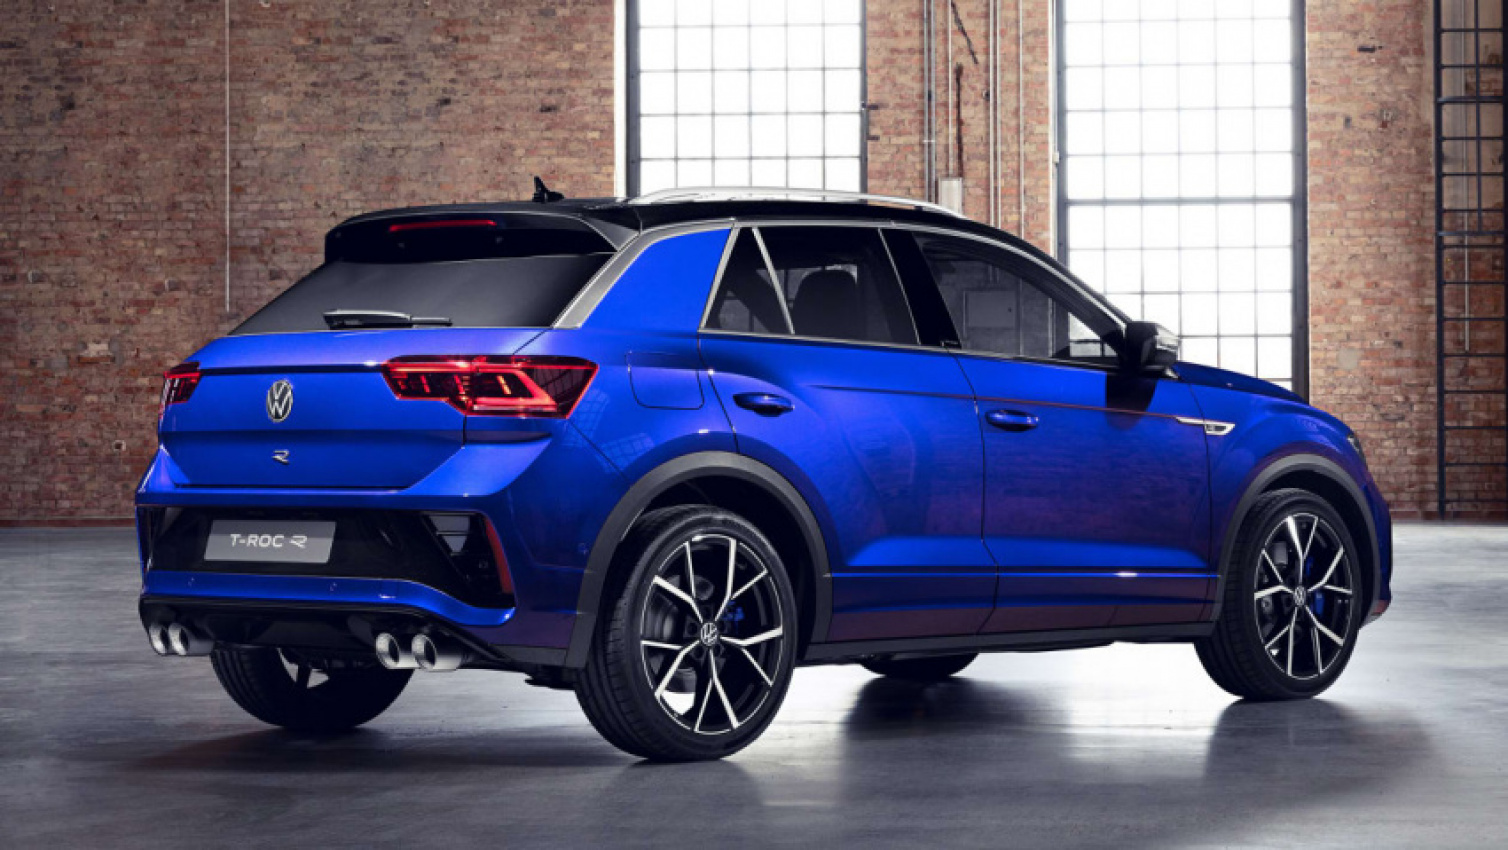 autos, cars, reviews, volkswagen, android, small suvs, t-roc, android, new facelifted volkswagen t-roc range starts from £25,000